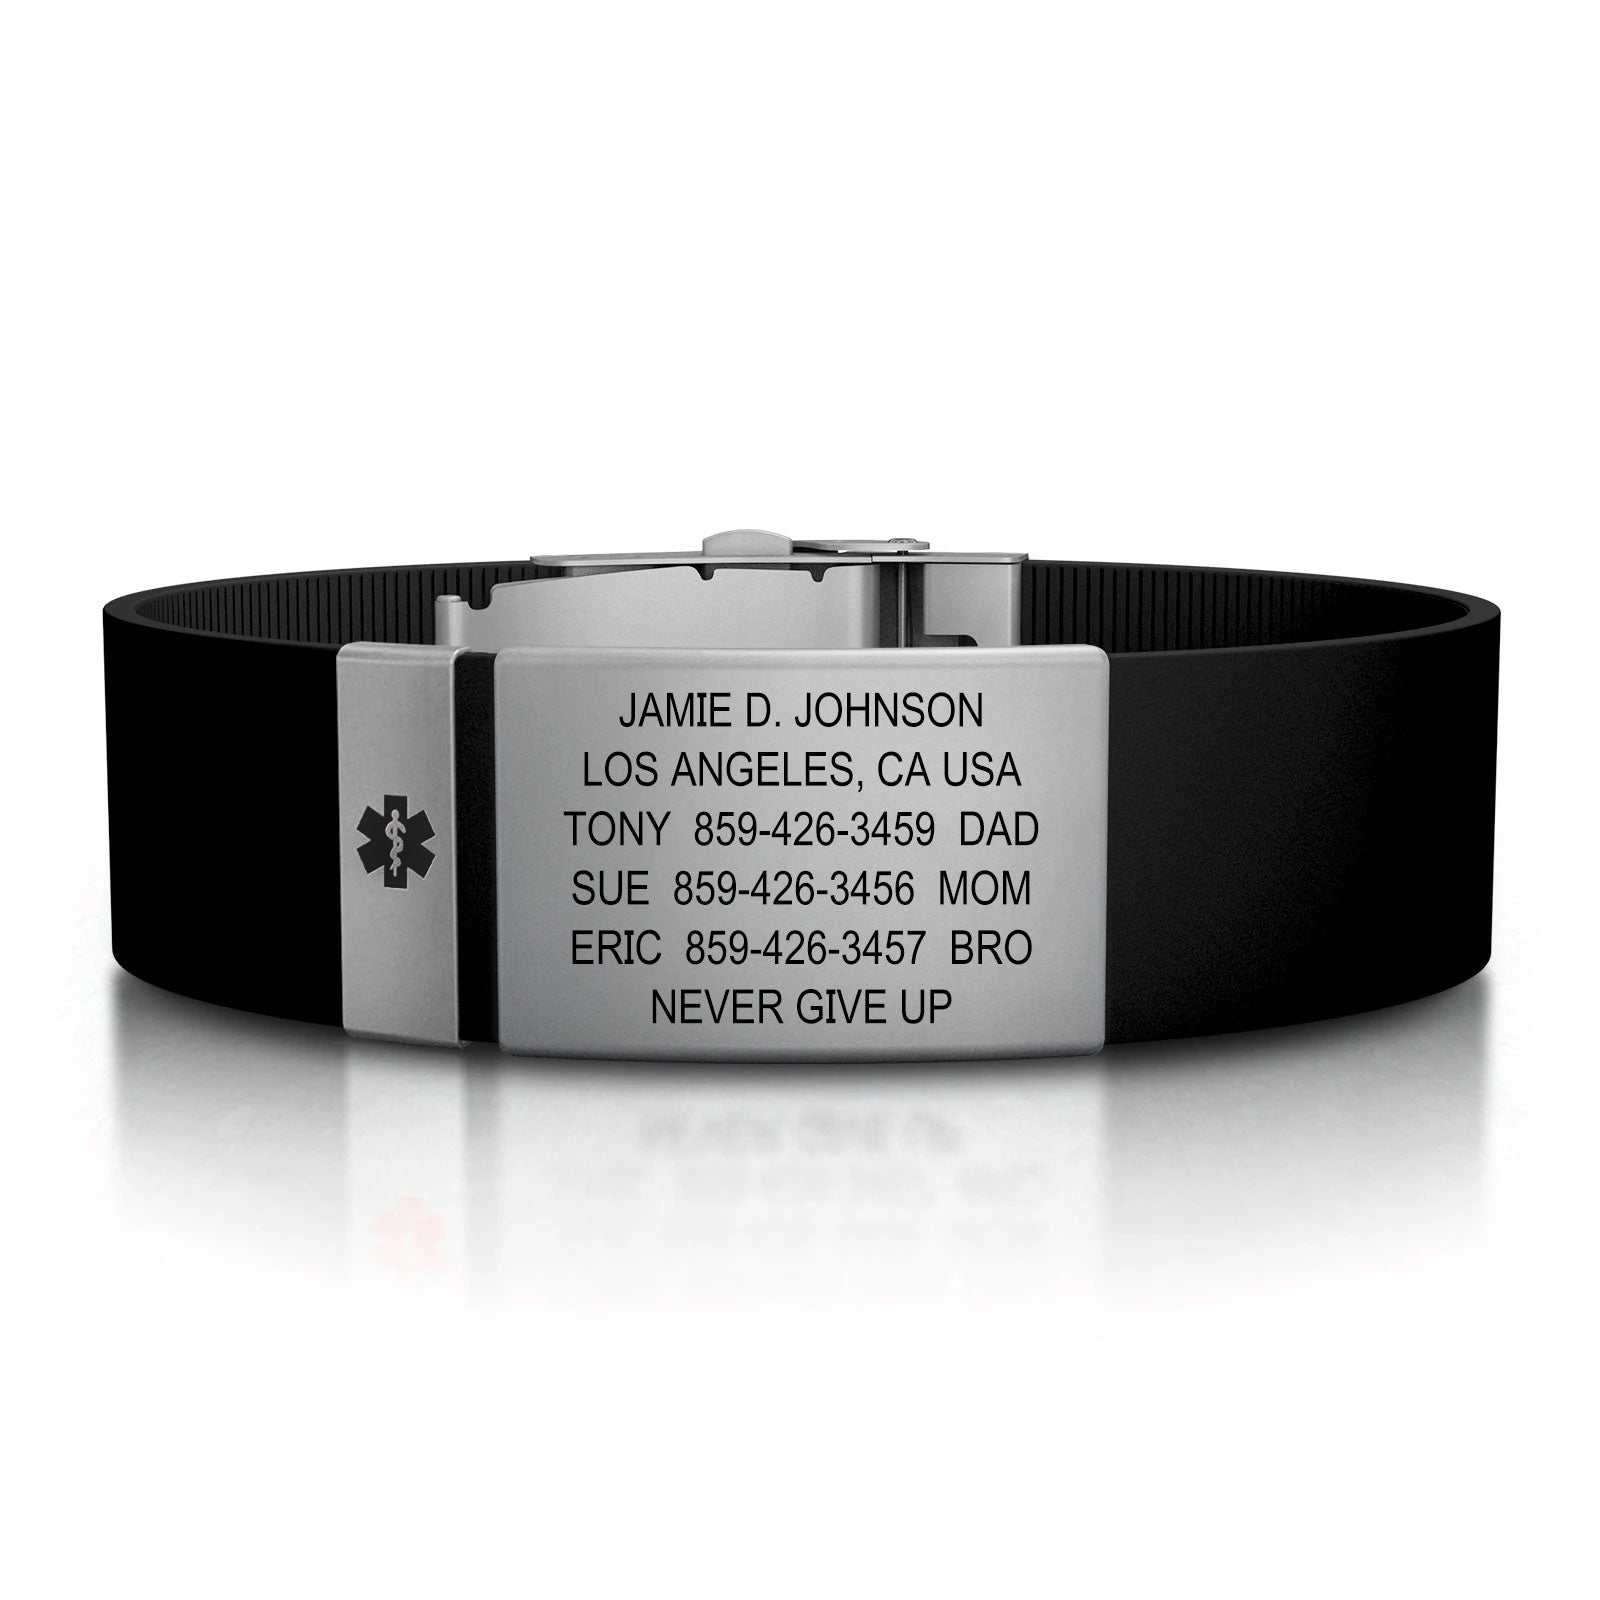 Medical Identification Wrist Bracelet with Clasp  Road iD  ROAD iD